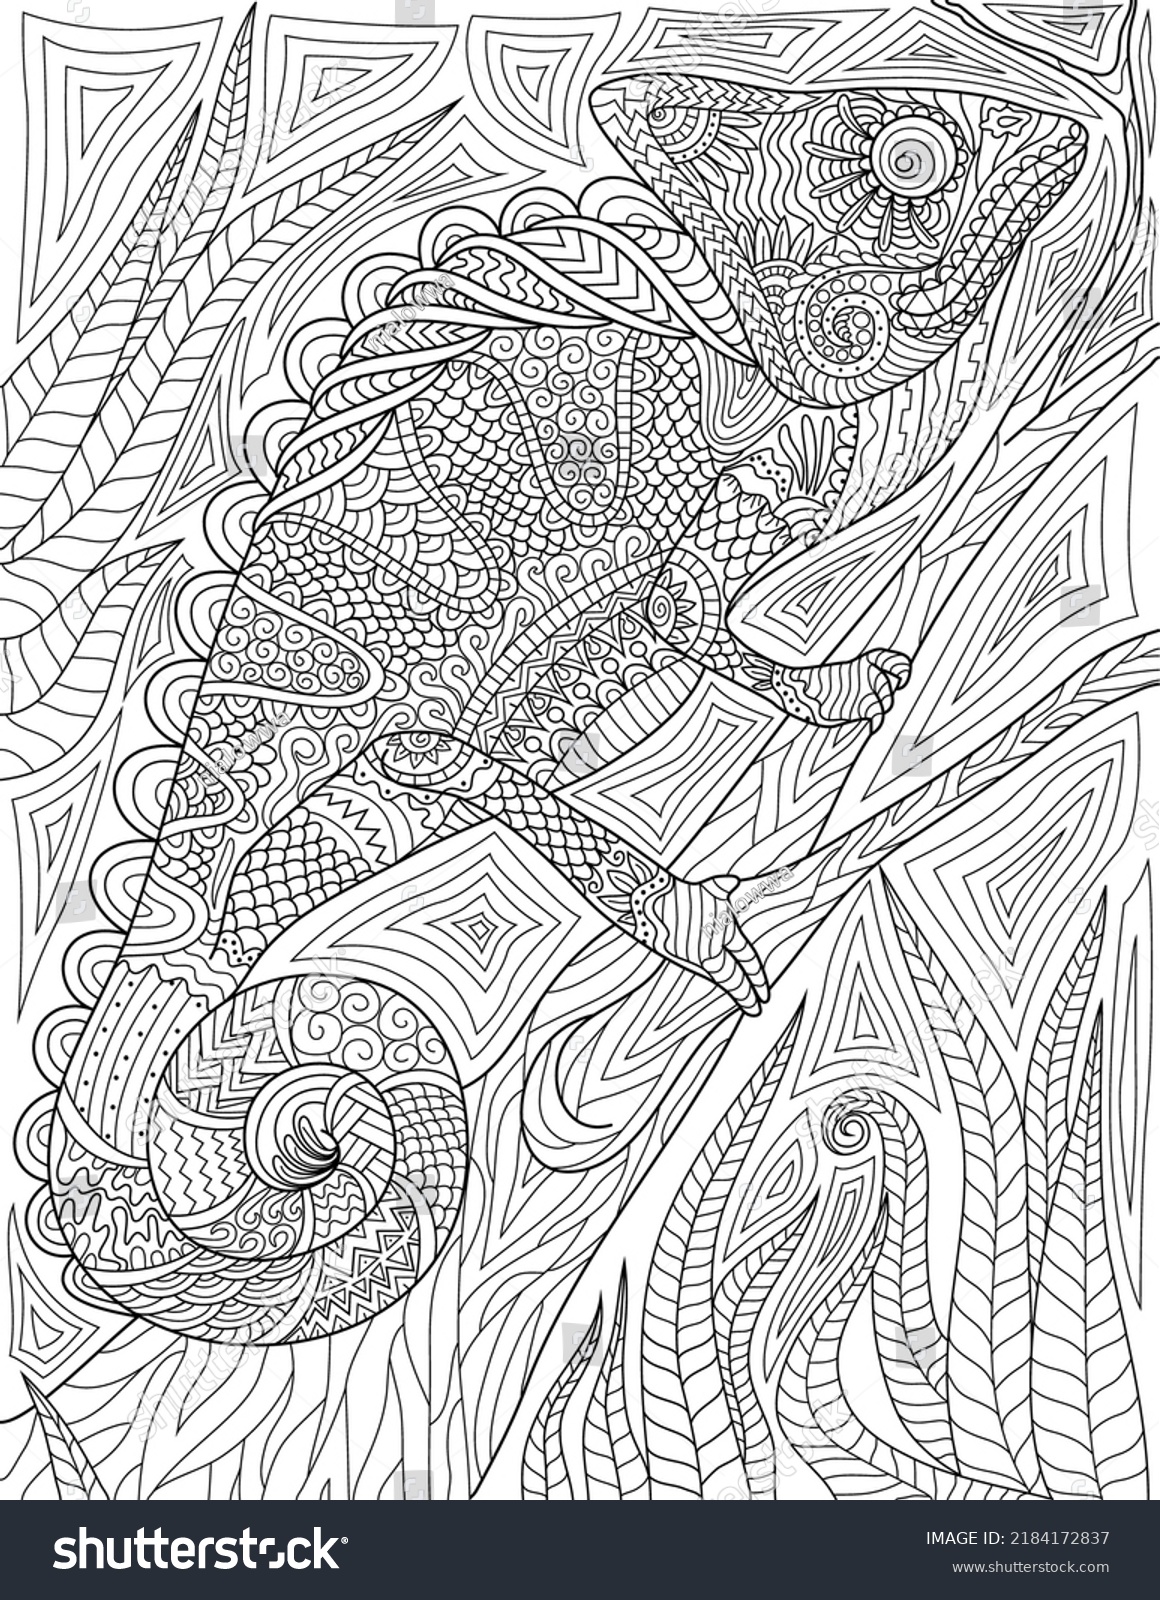 SVG of Coloring Book Page With Iguana Climbing On Tree With Detailed Background. Sheet To Be Colored With Lizard Crawling On Wood. Chameleon Going Up On Timber. svg